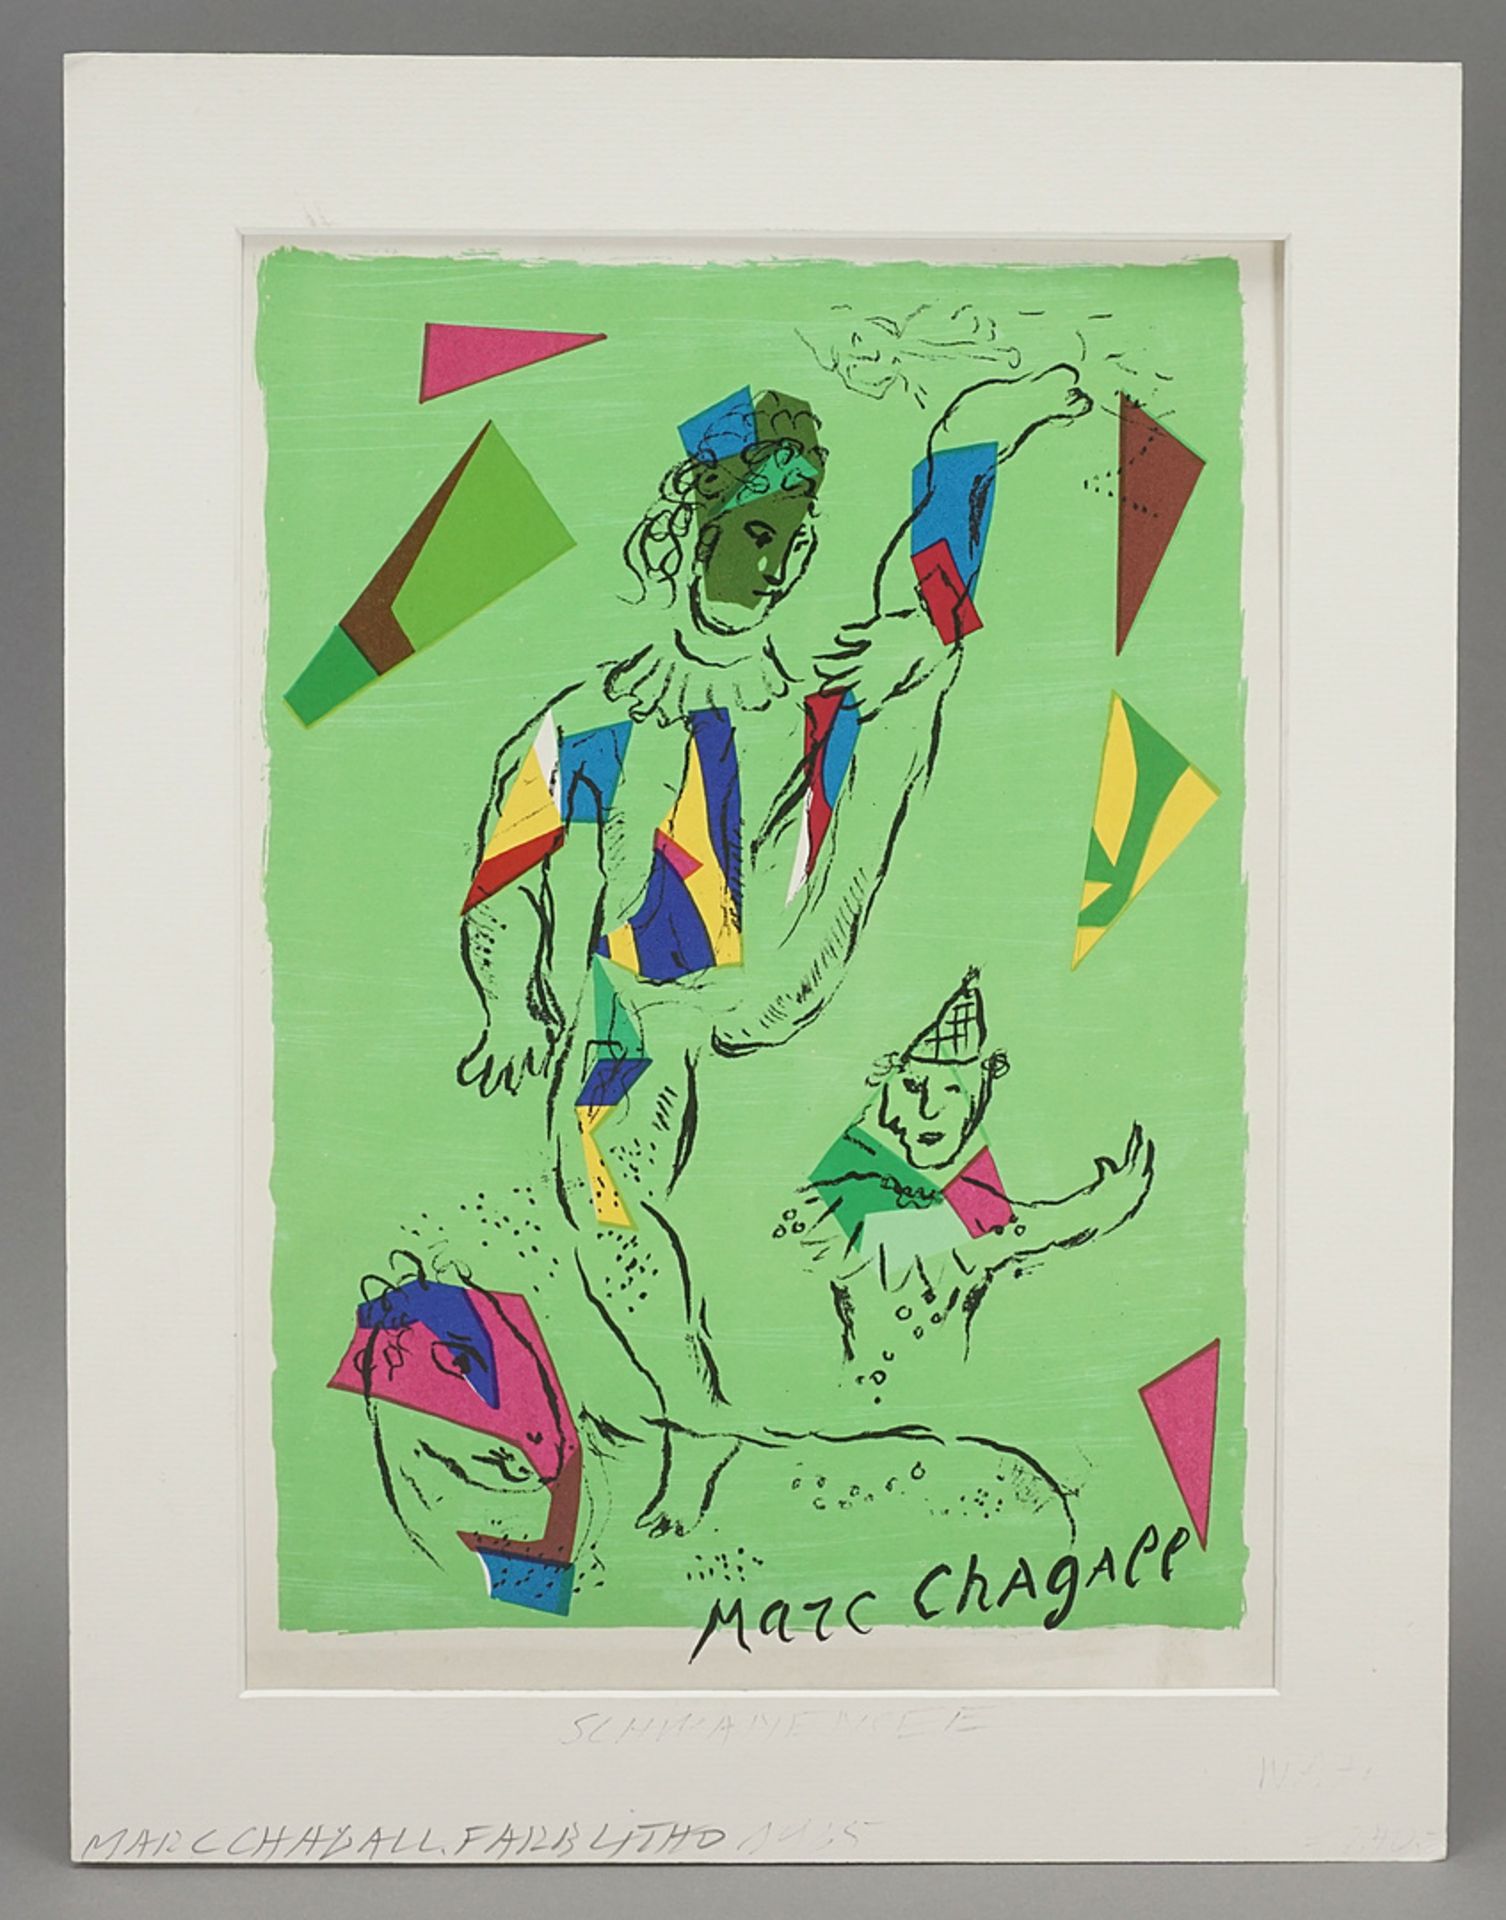 Marc Chagall (1887-1985), "L'Acrobate vert" (The Green Acrobat) - Image 2 of 4